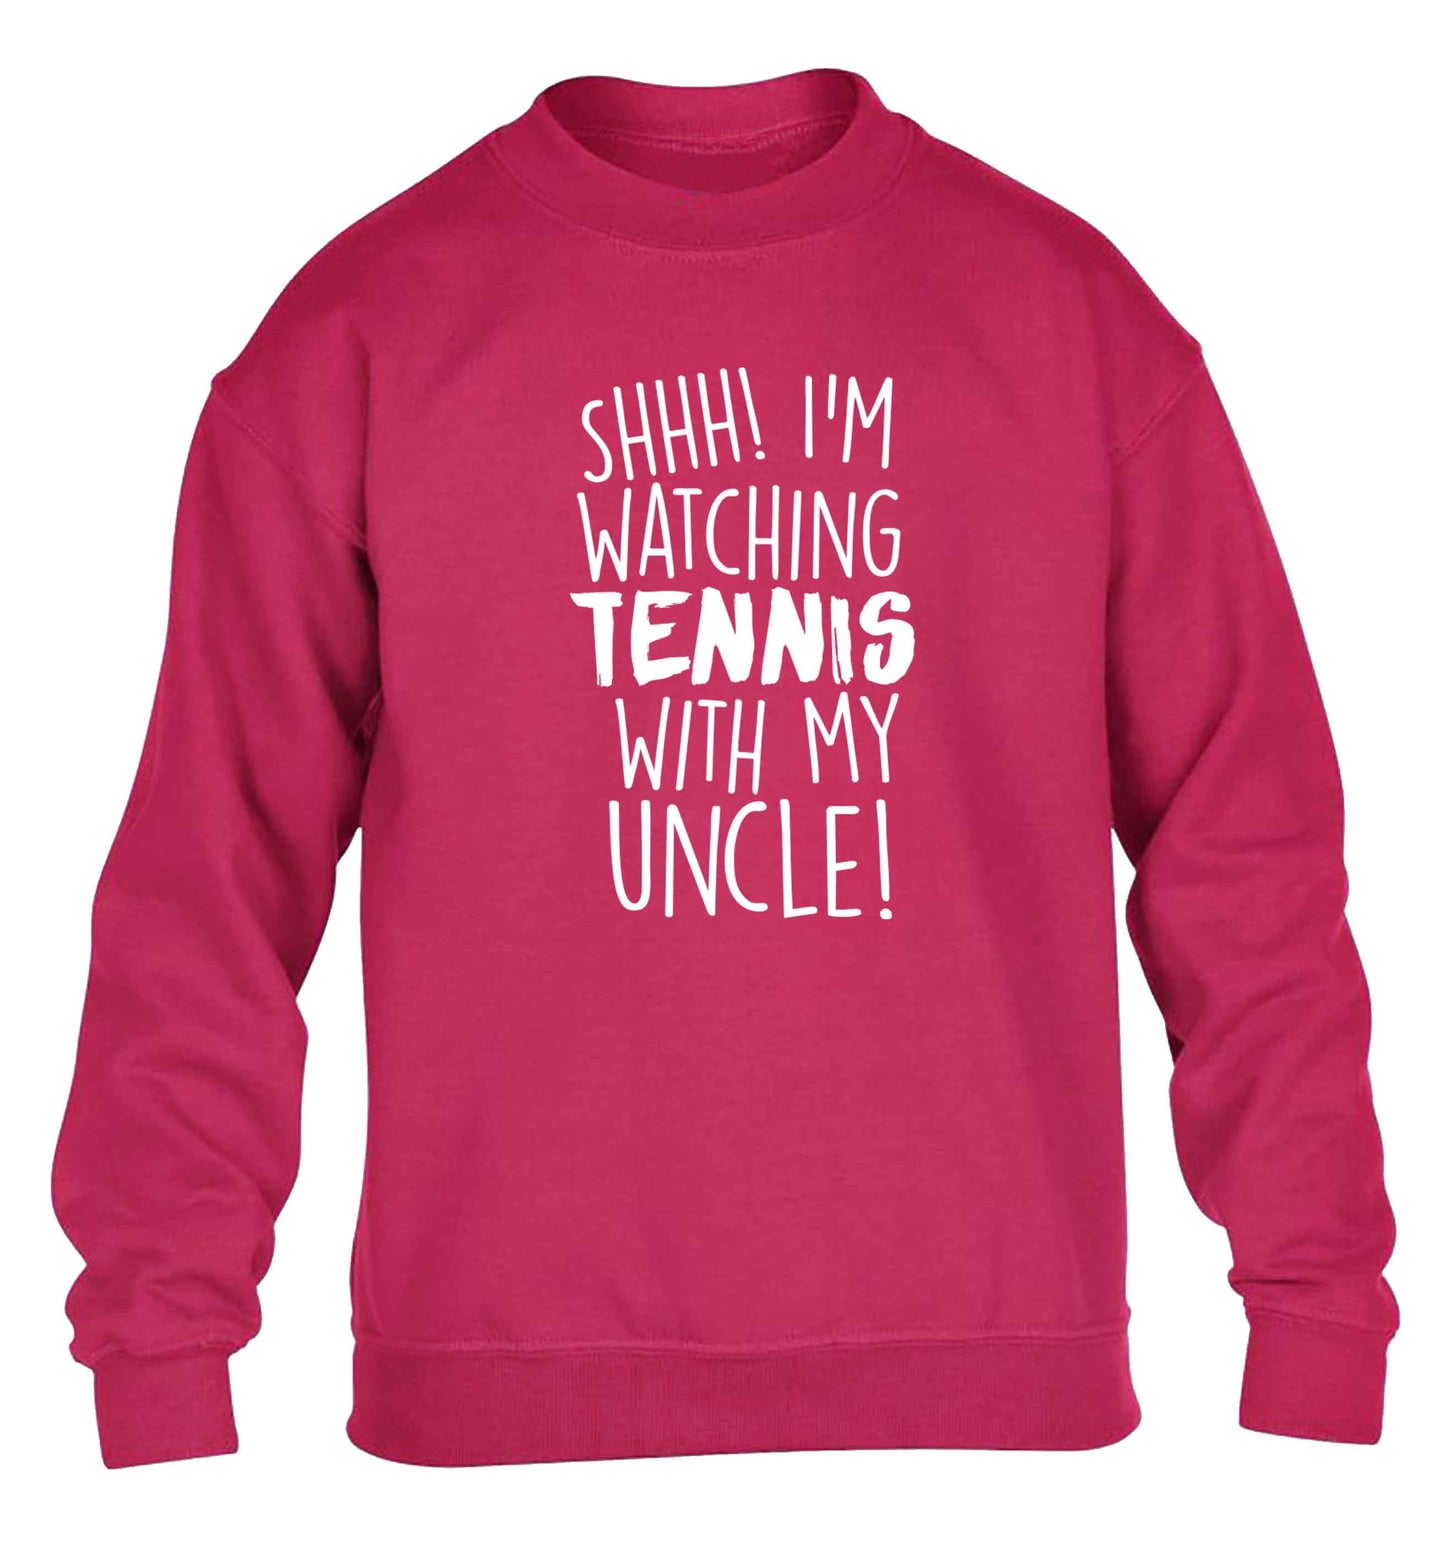 Shh! I'm watching tennis with my uncle! children's pink sweater 12-13 Years